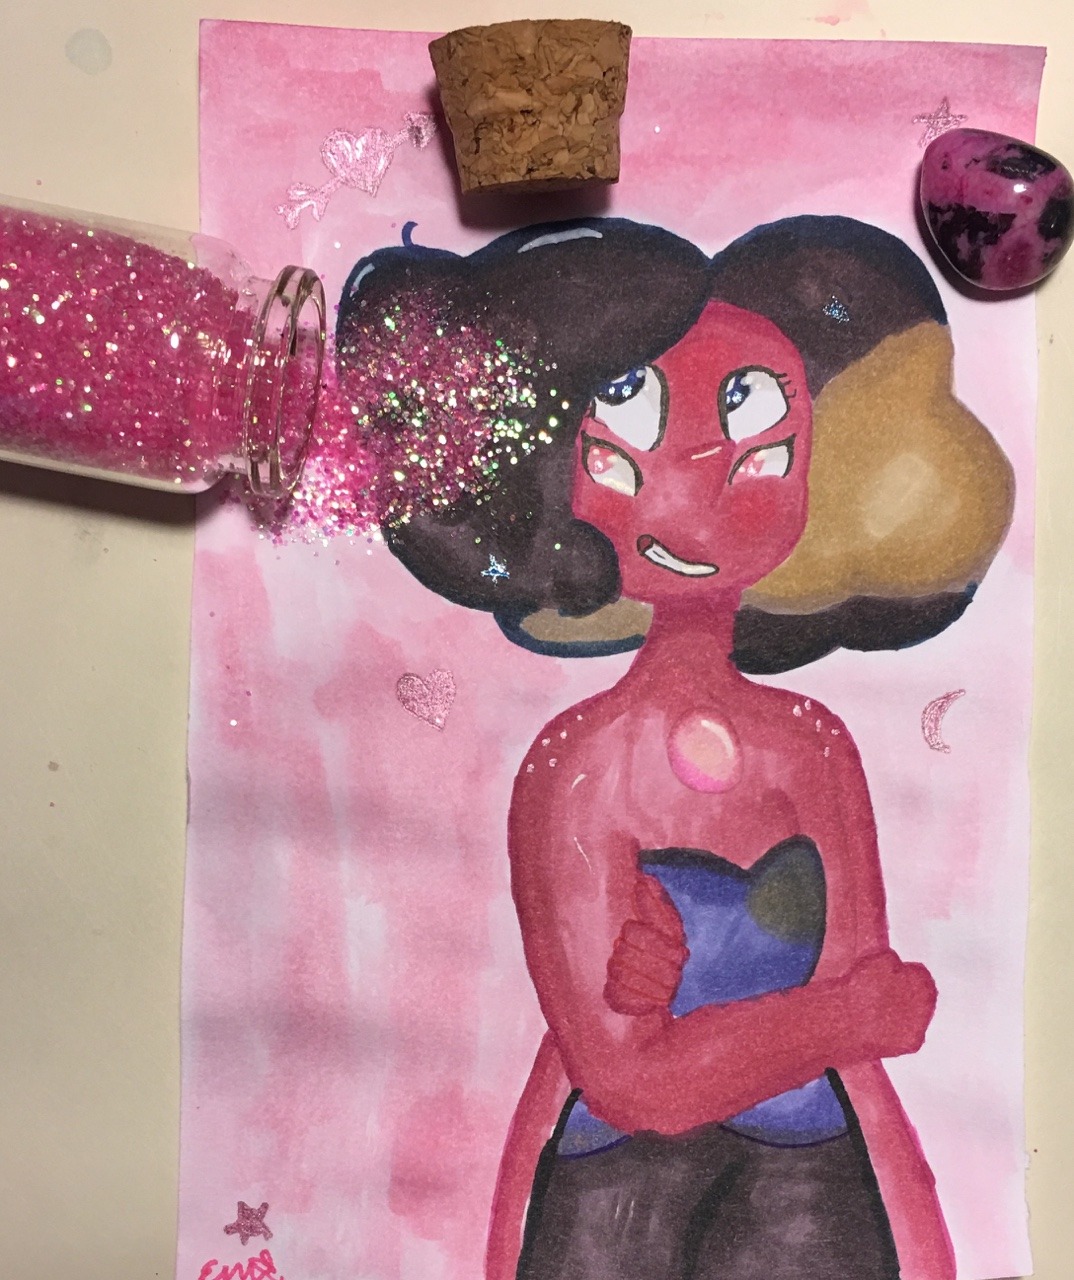 Here’s a rhodonite painting I did! I’m p proud of this.